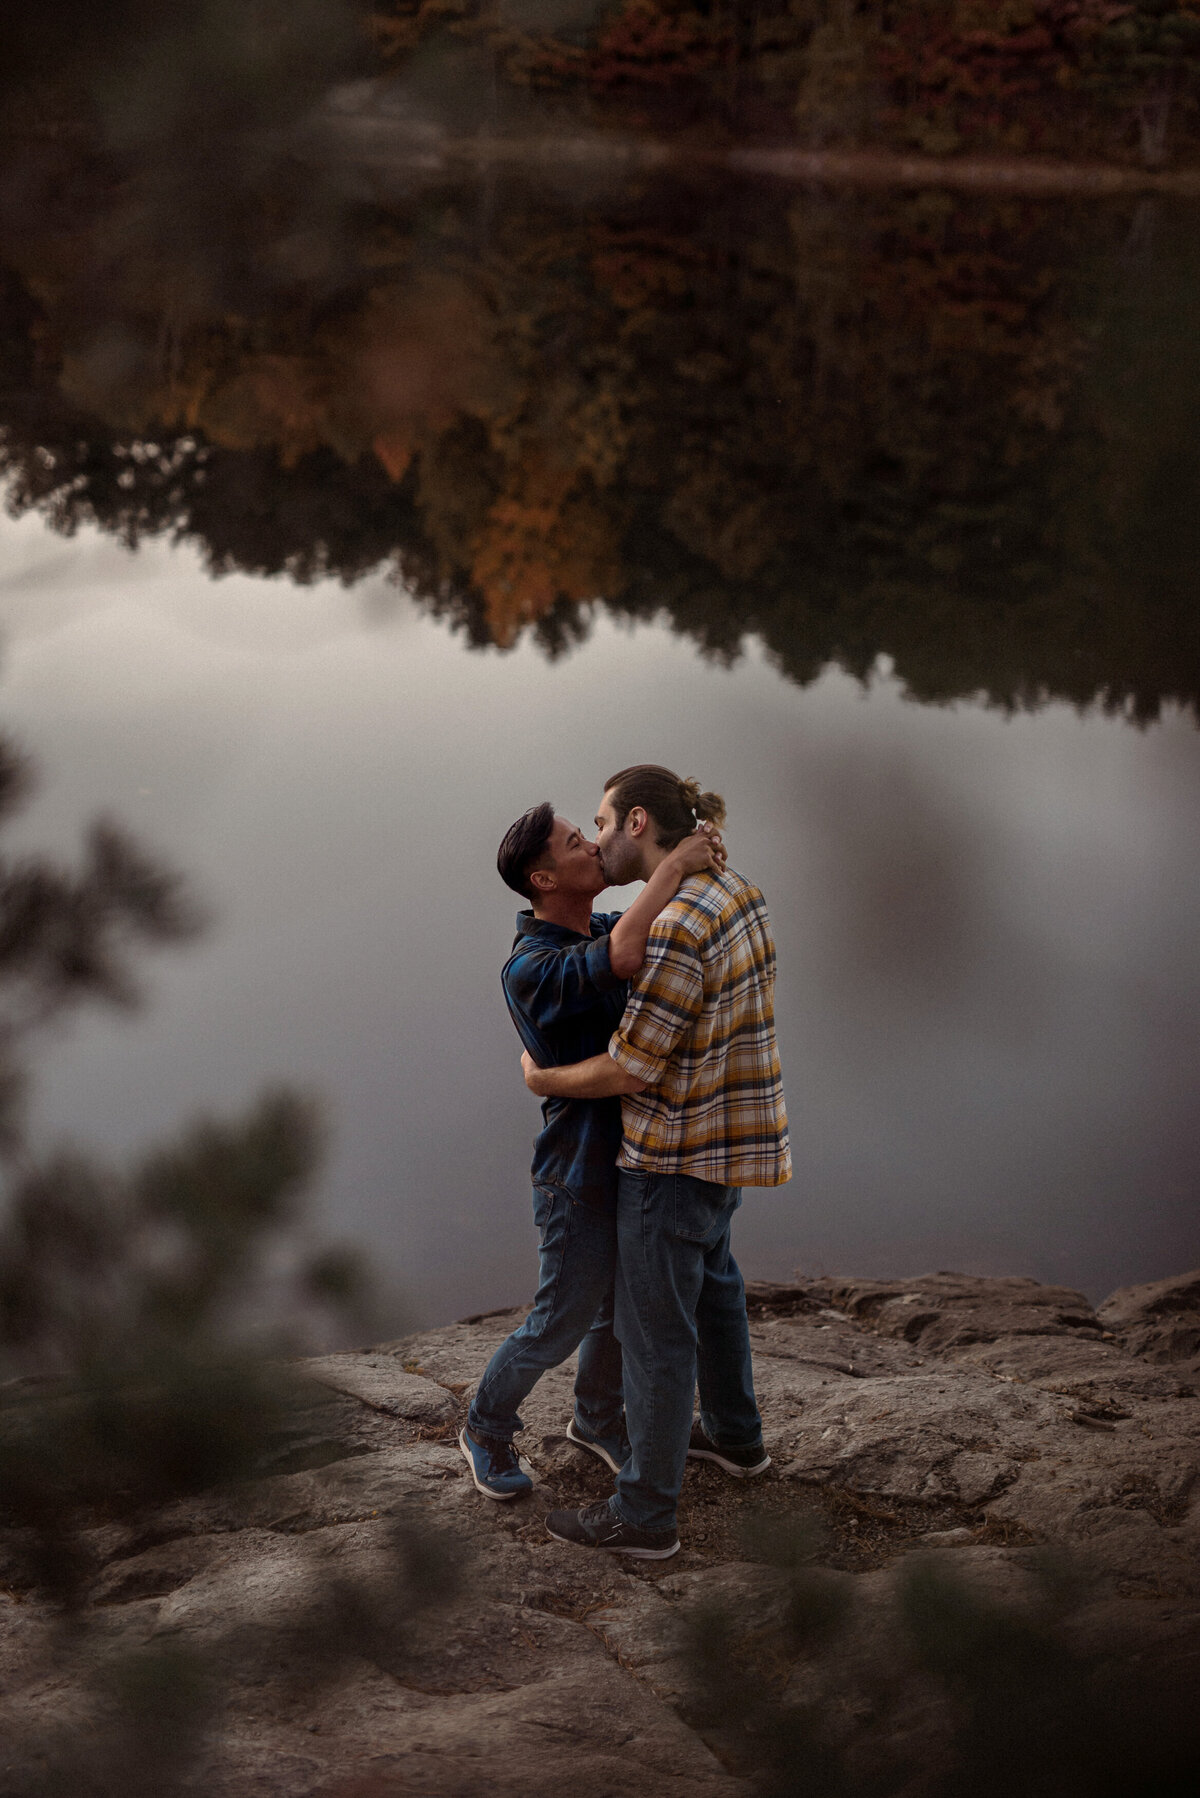 two men engagement session at a lake in the woods on a fall day. a gay couple and lgbtw friendly session. featuring a white man and asian man.